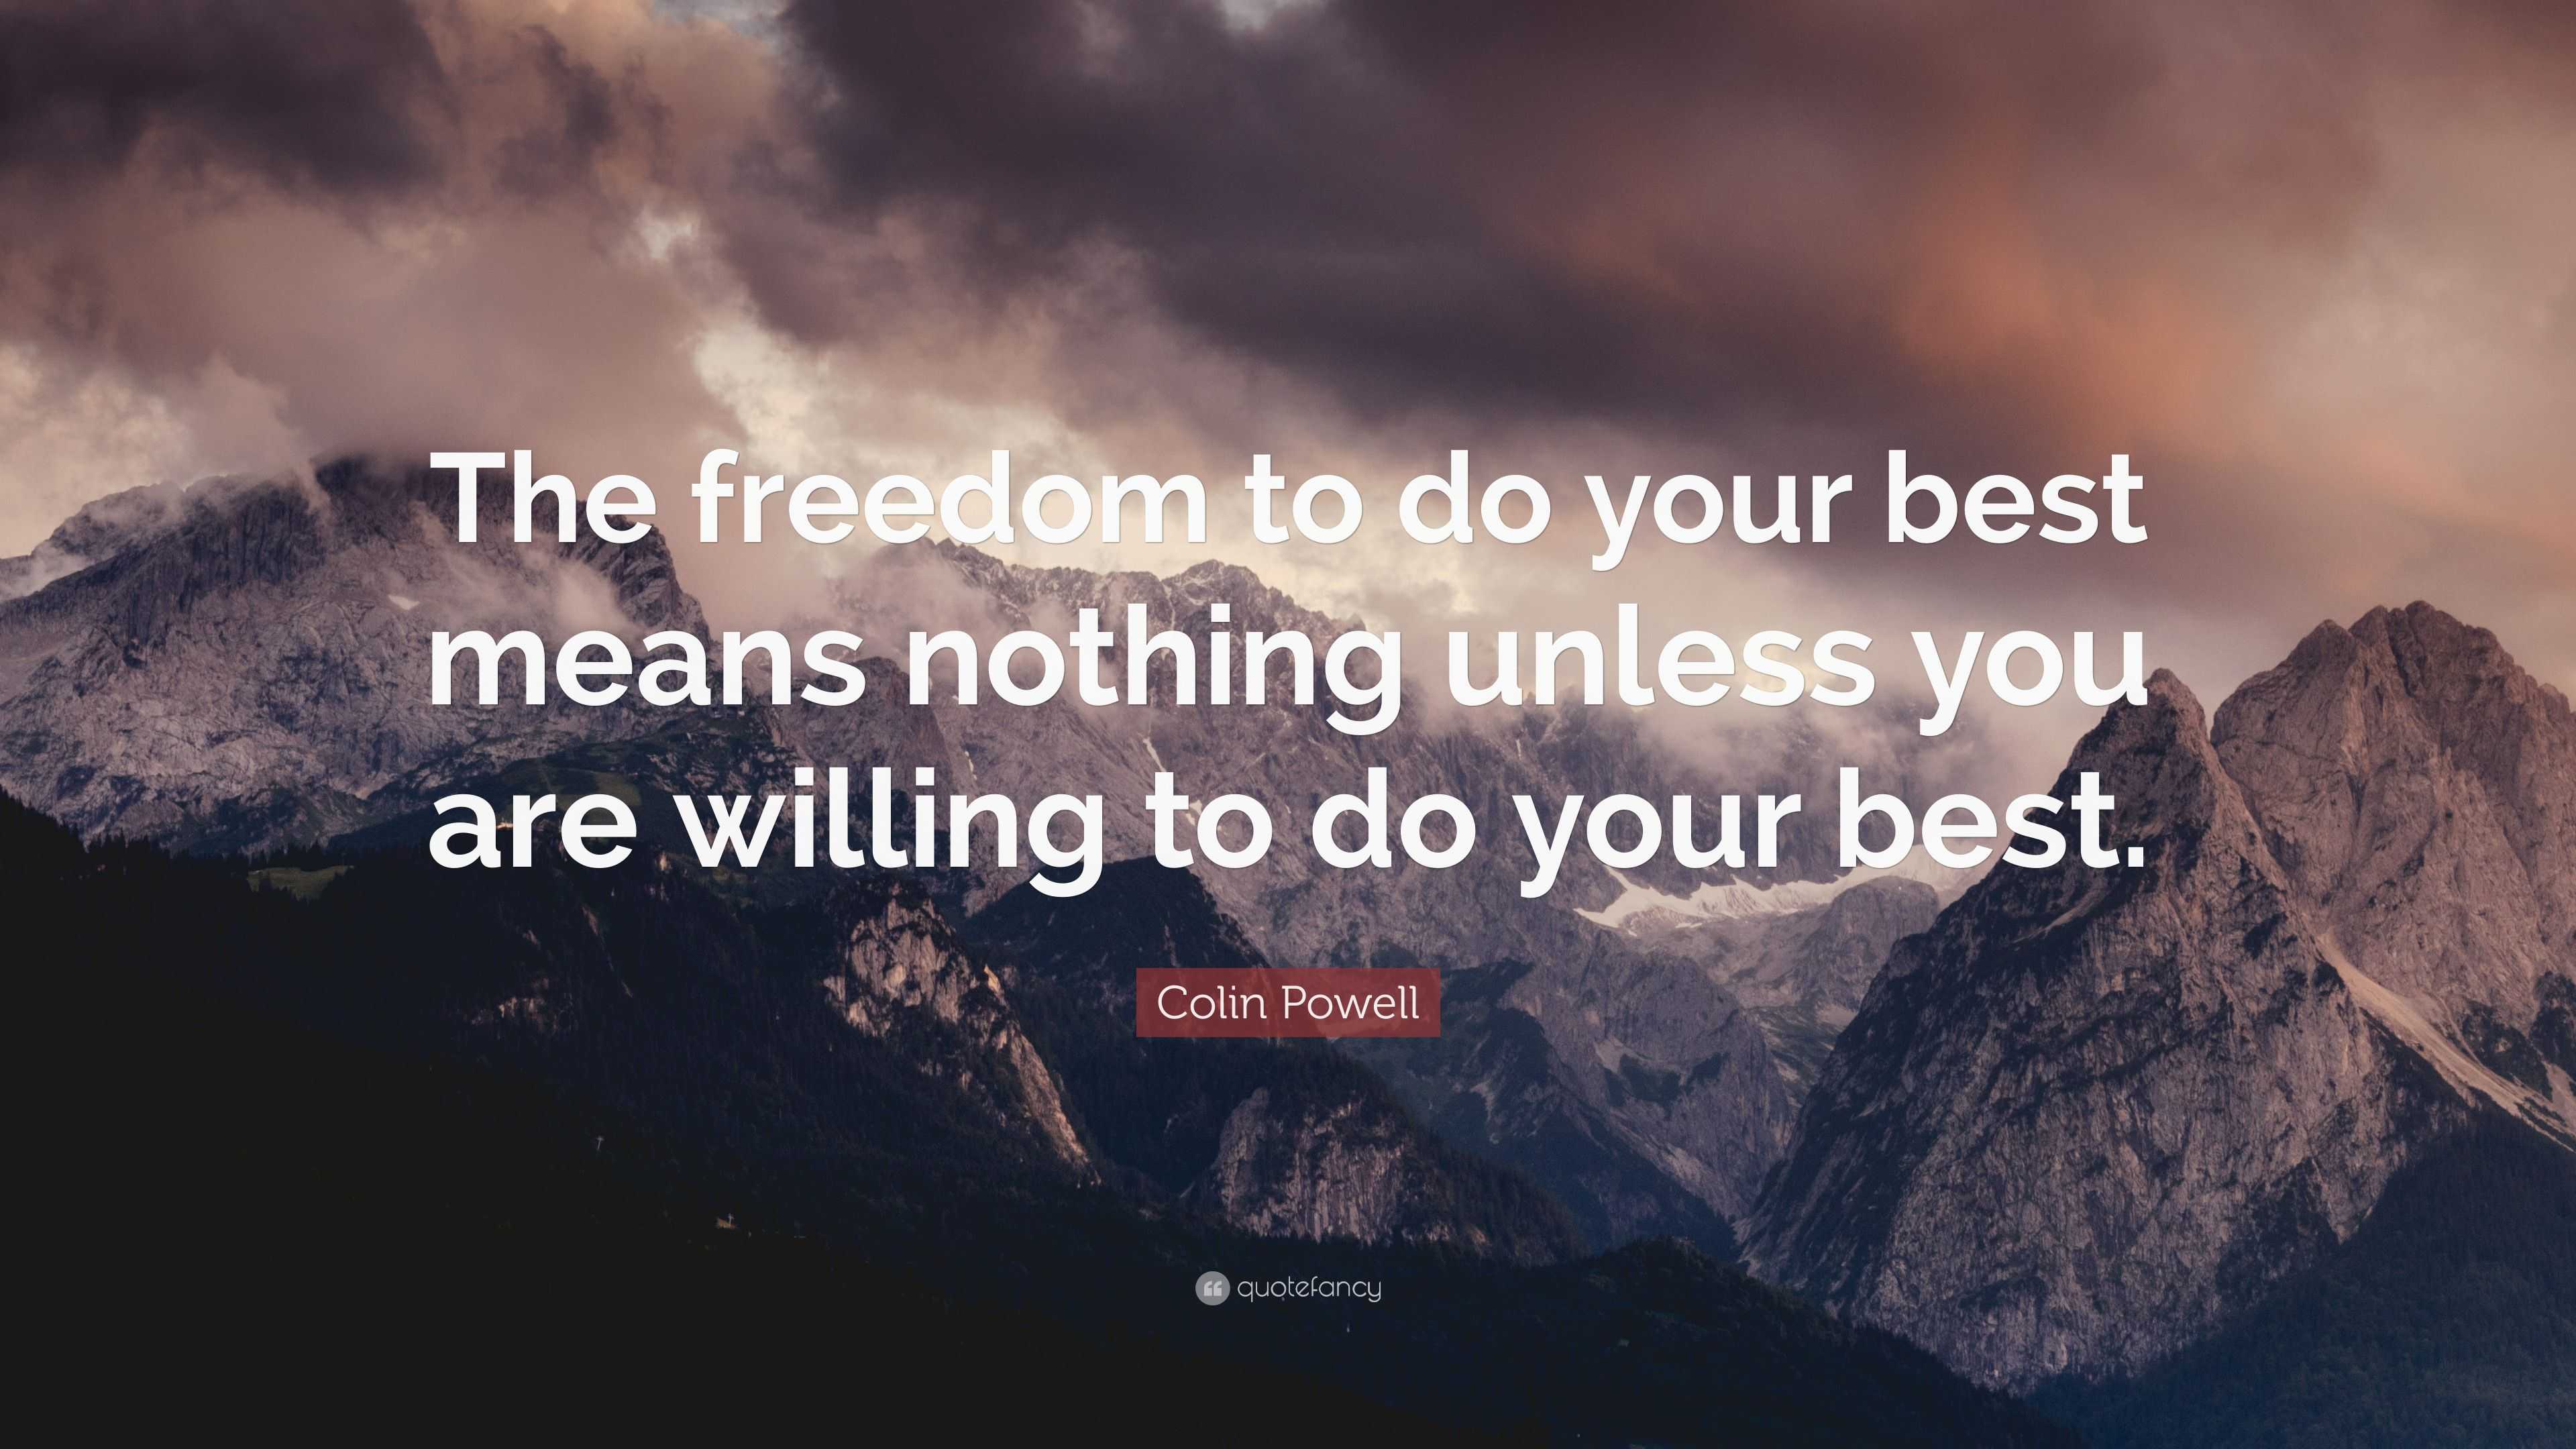 Colin Powell Quote: “The freedom to do your best means nothing unless ...